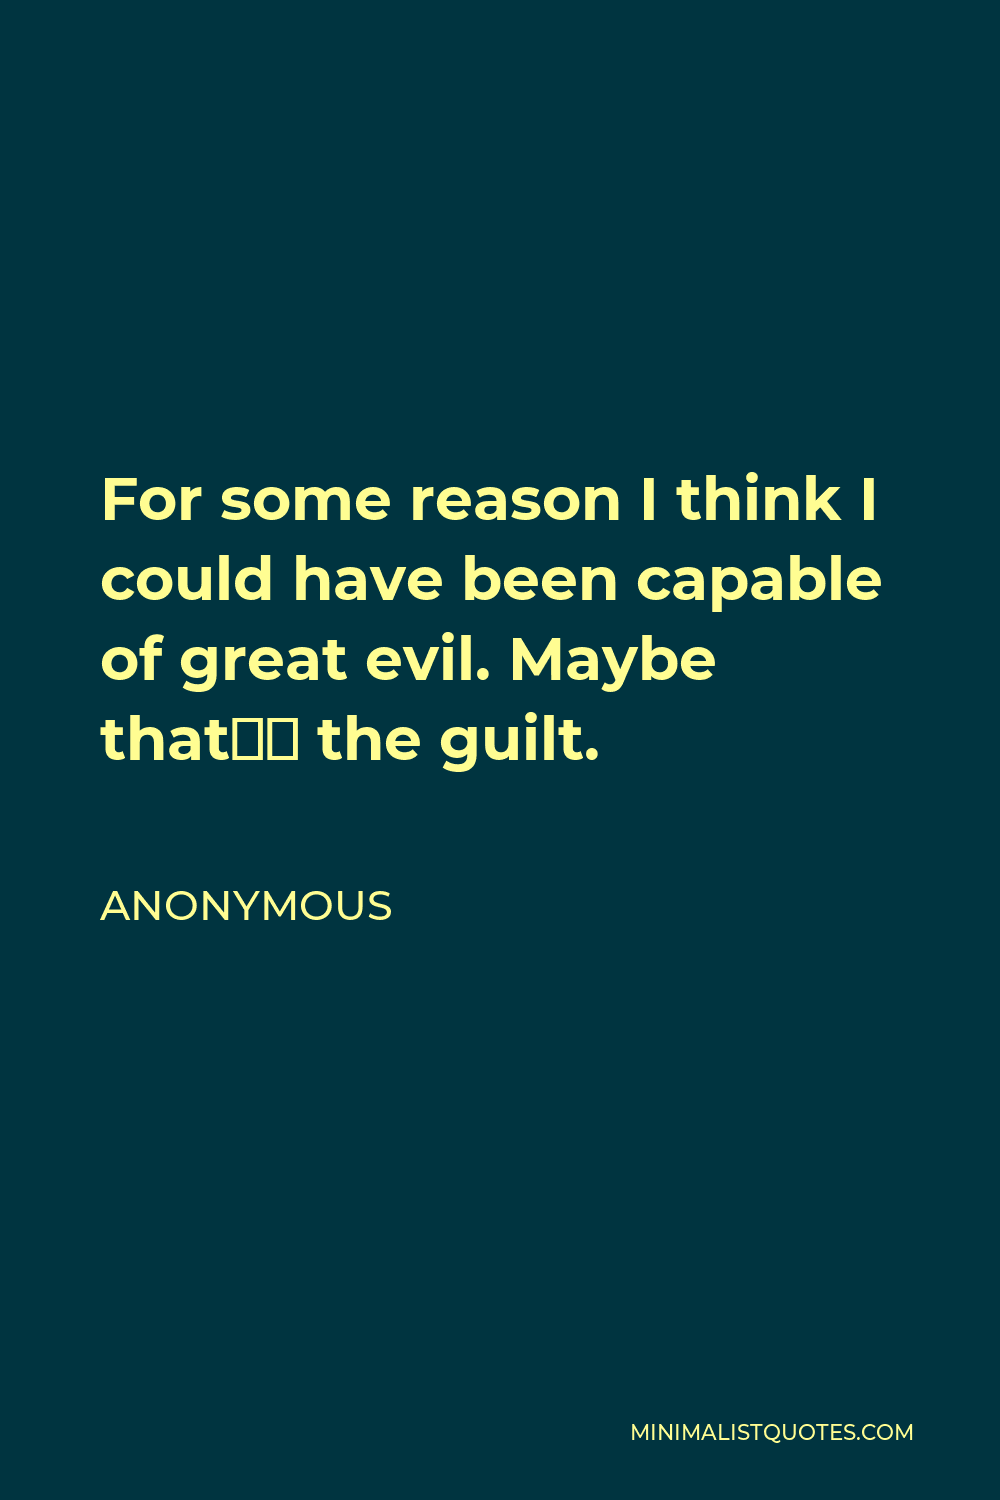 Anonymous Quote - For some reason I think I could have been capable of great evil. Maybe that’s the guilt.